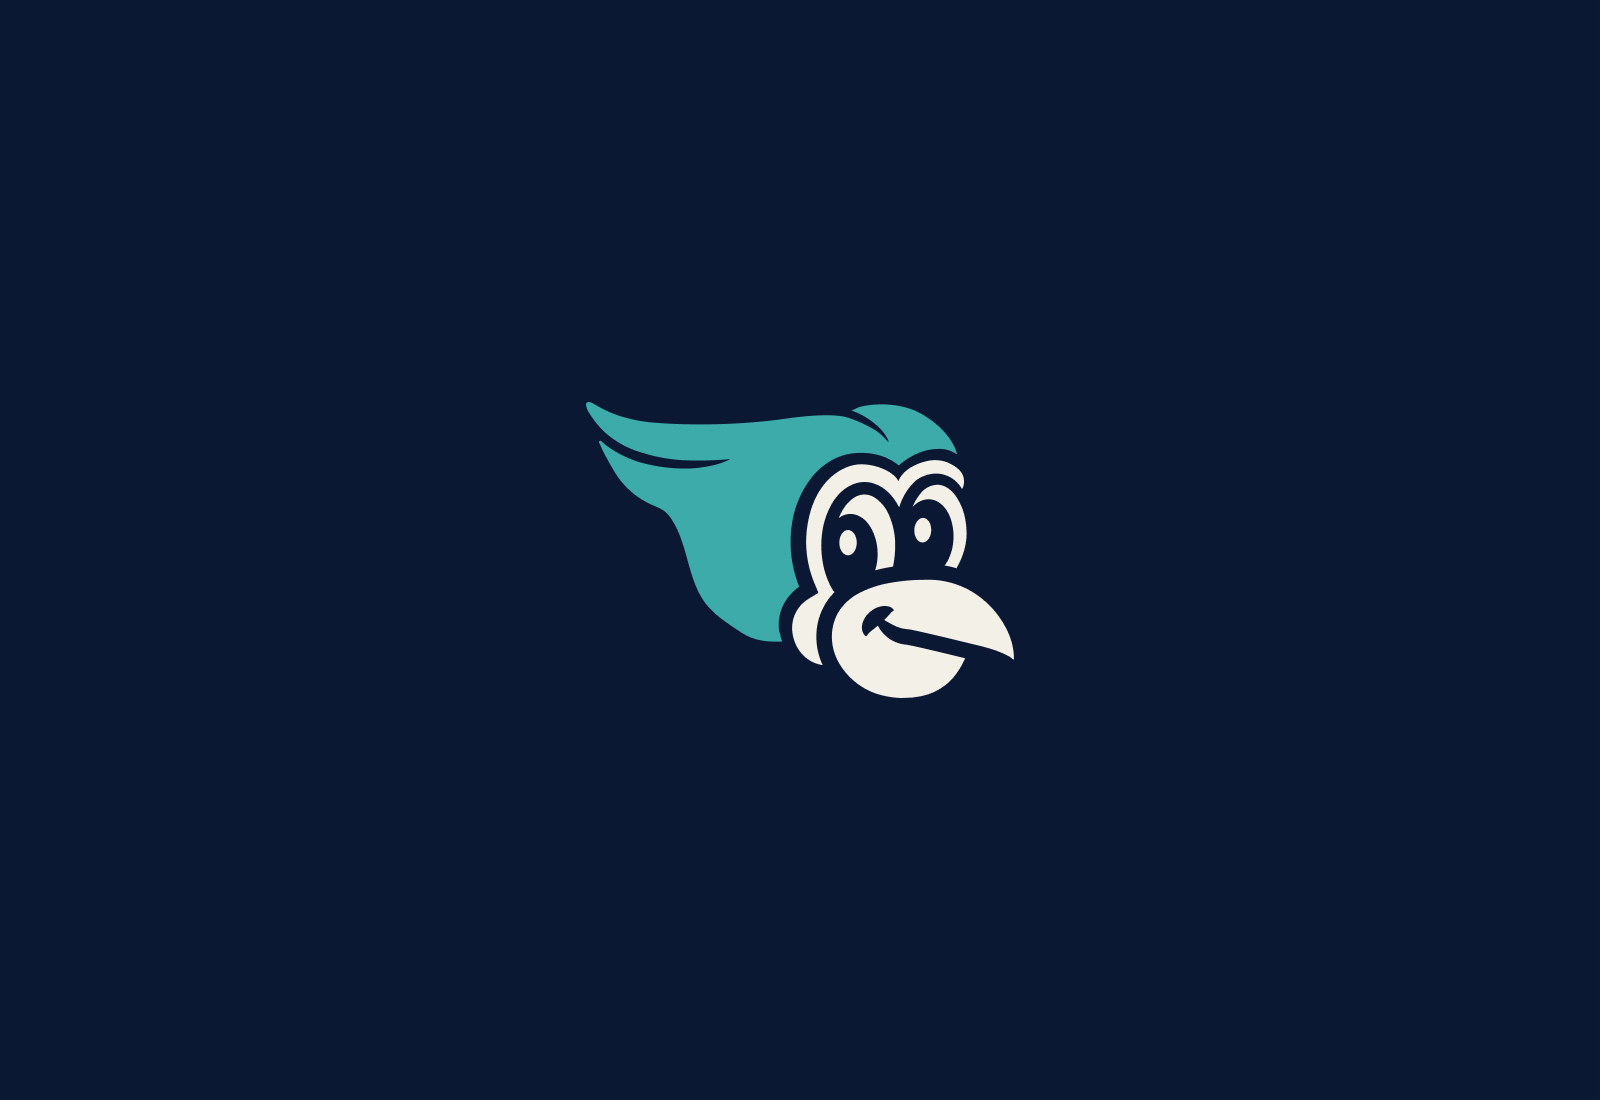 Bird Mascot Illustration | Byrd's Estate Sales and Liquidations | Brand Identity by Joey Carty